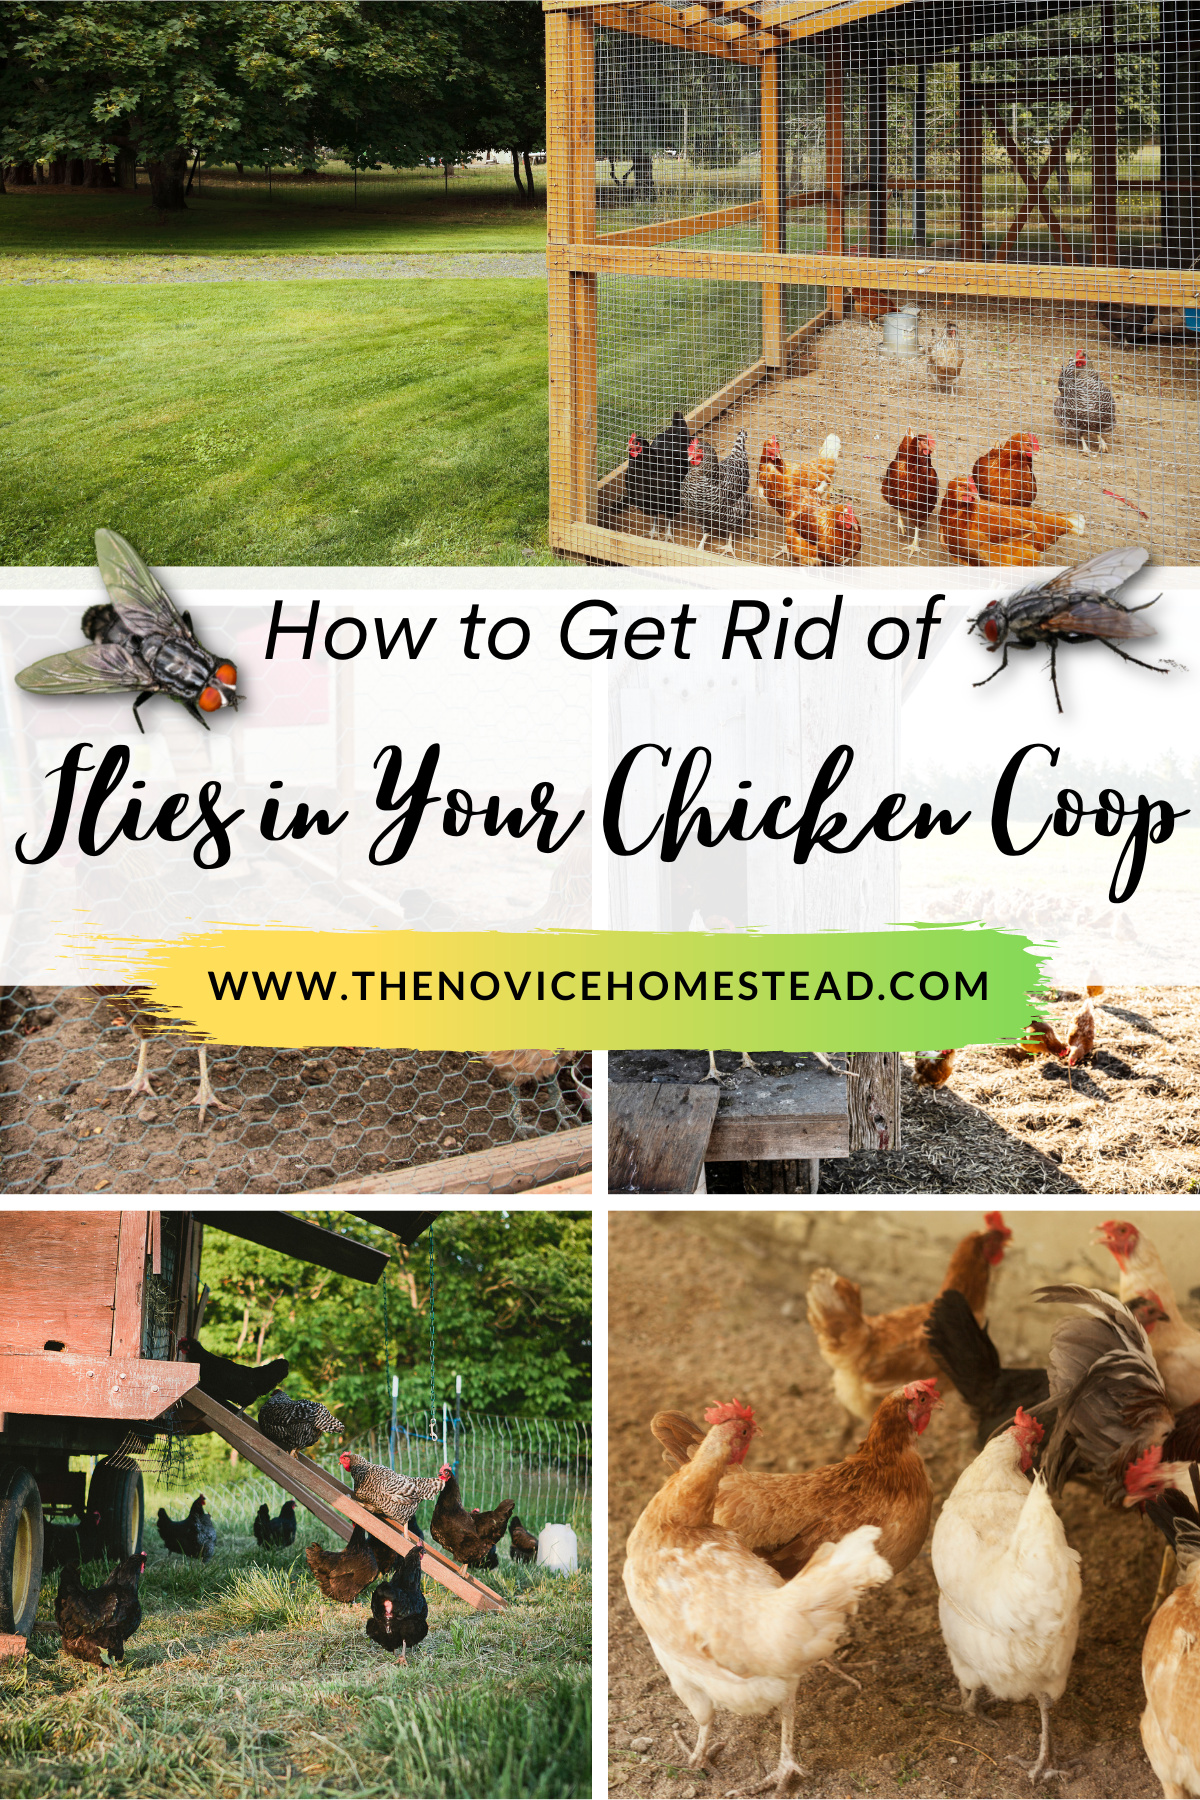 collage image of chicken coops; text overlay "How to Get Rid of Flies in Your Chicken Coop"